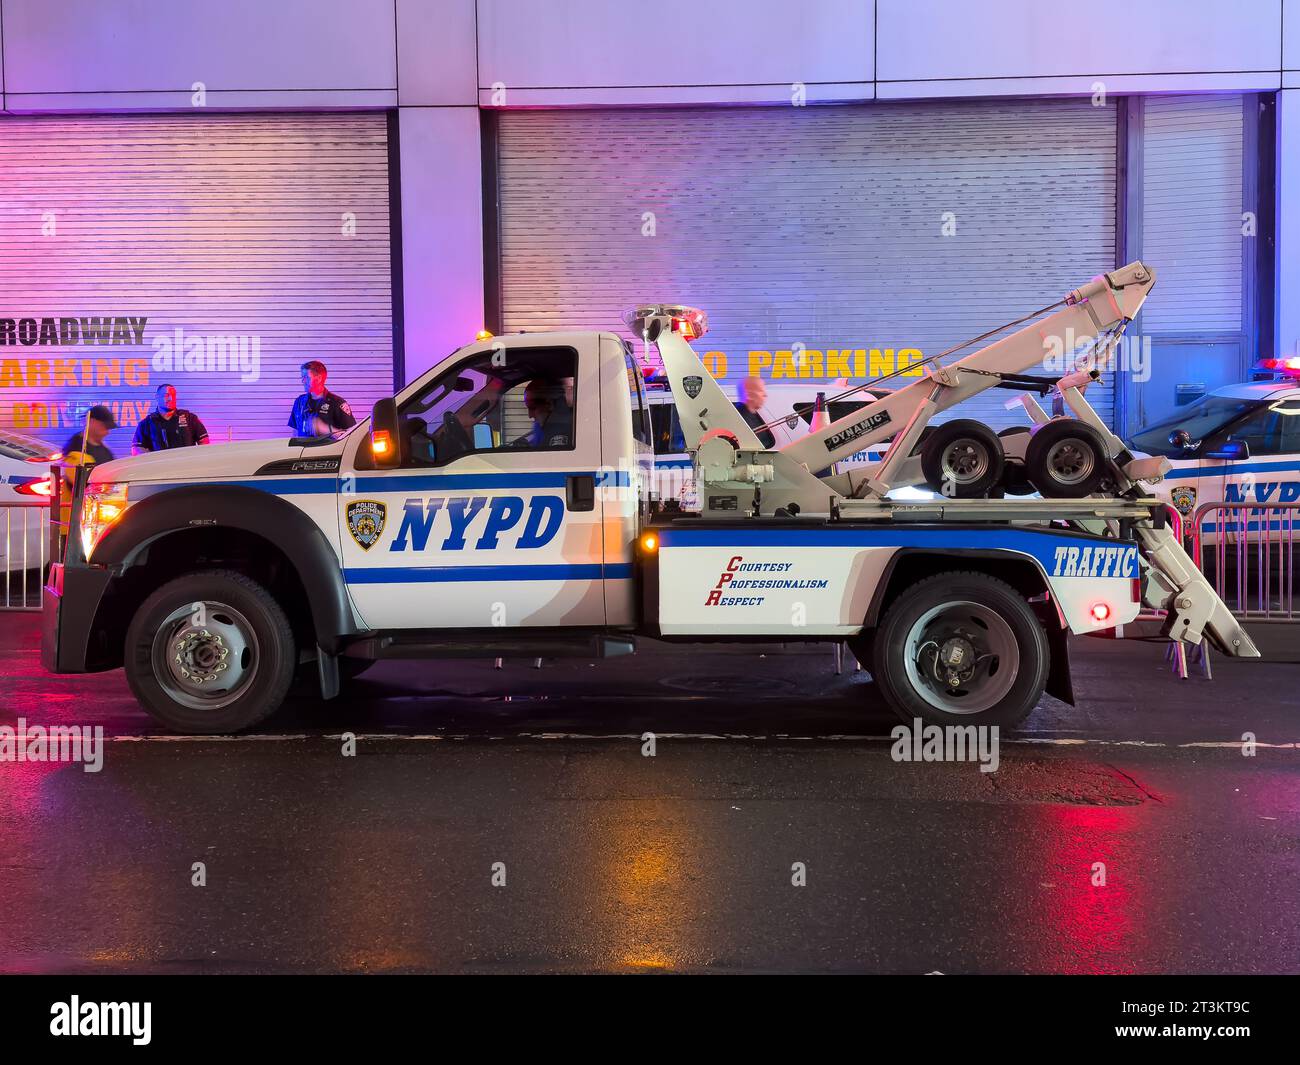 New York, United States. City of New York Police Department (NYPD) Ford Tow Truck - Traffic Enforcement in Manhattan, NYC. Stock Photo